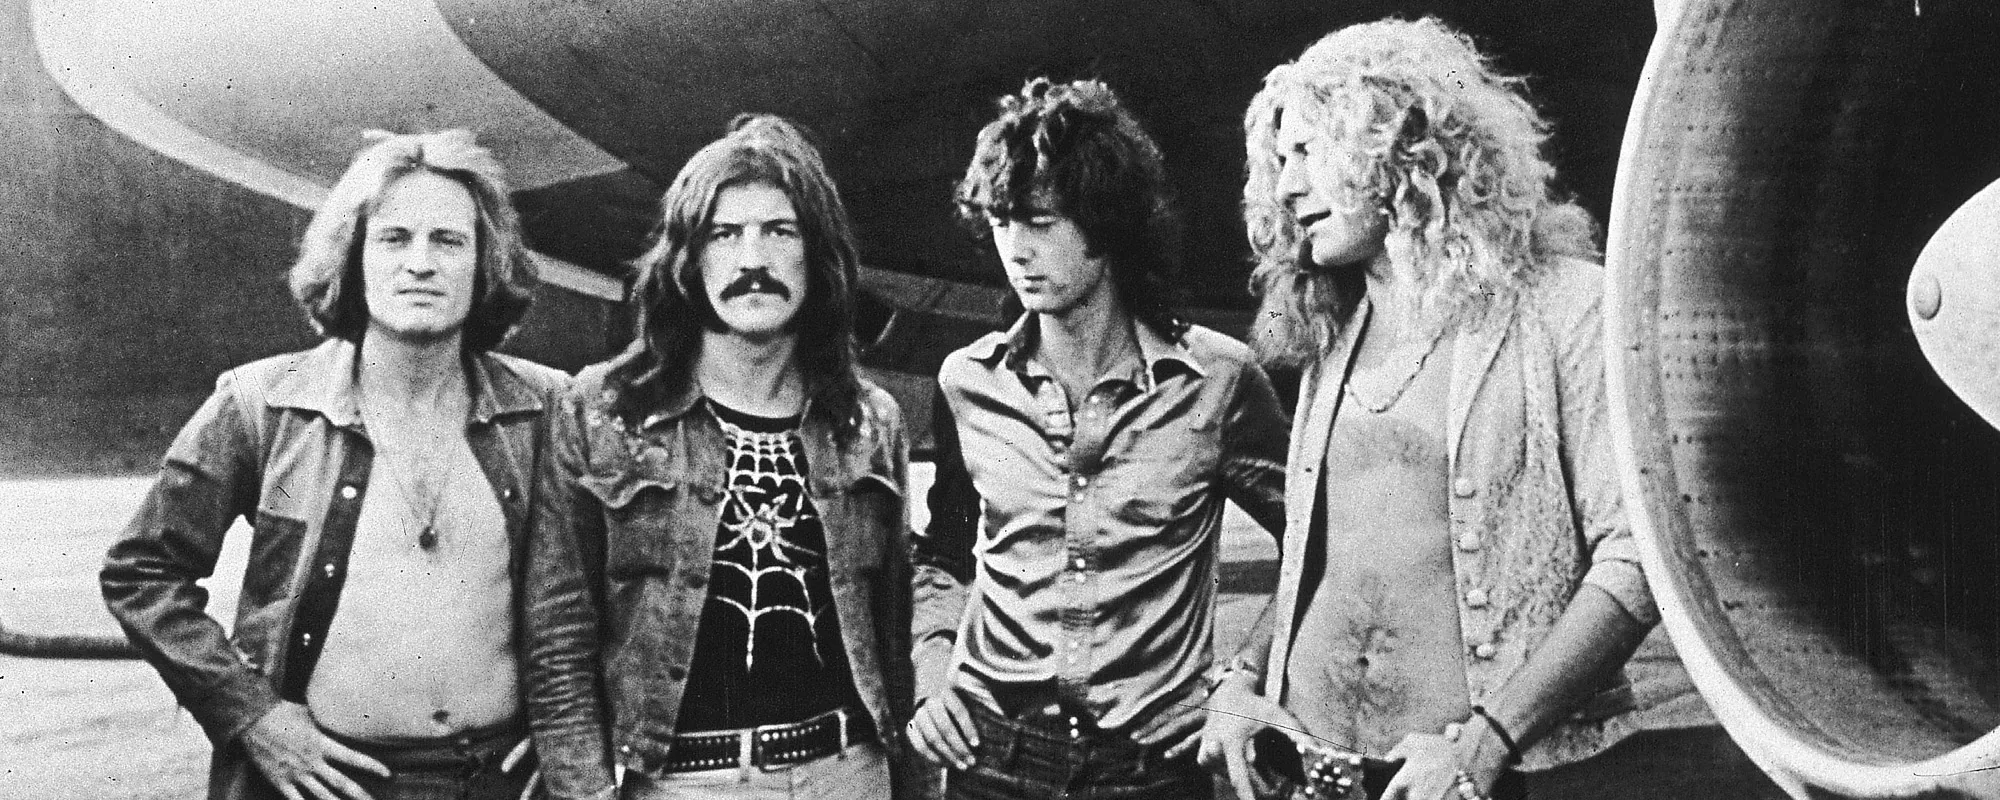 What is the Meaning Behind Led Zeppelin, “Stairway To Heaven”?